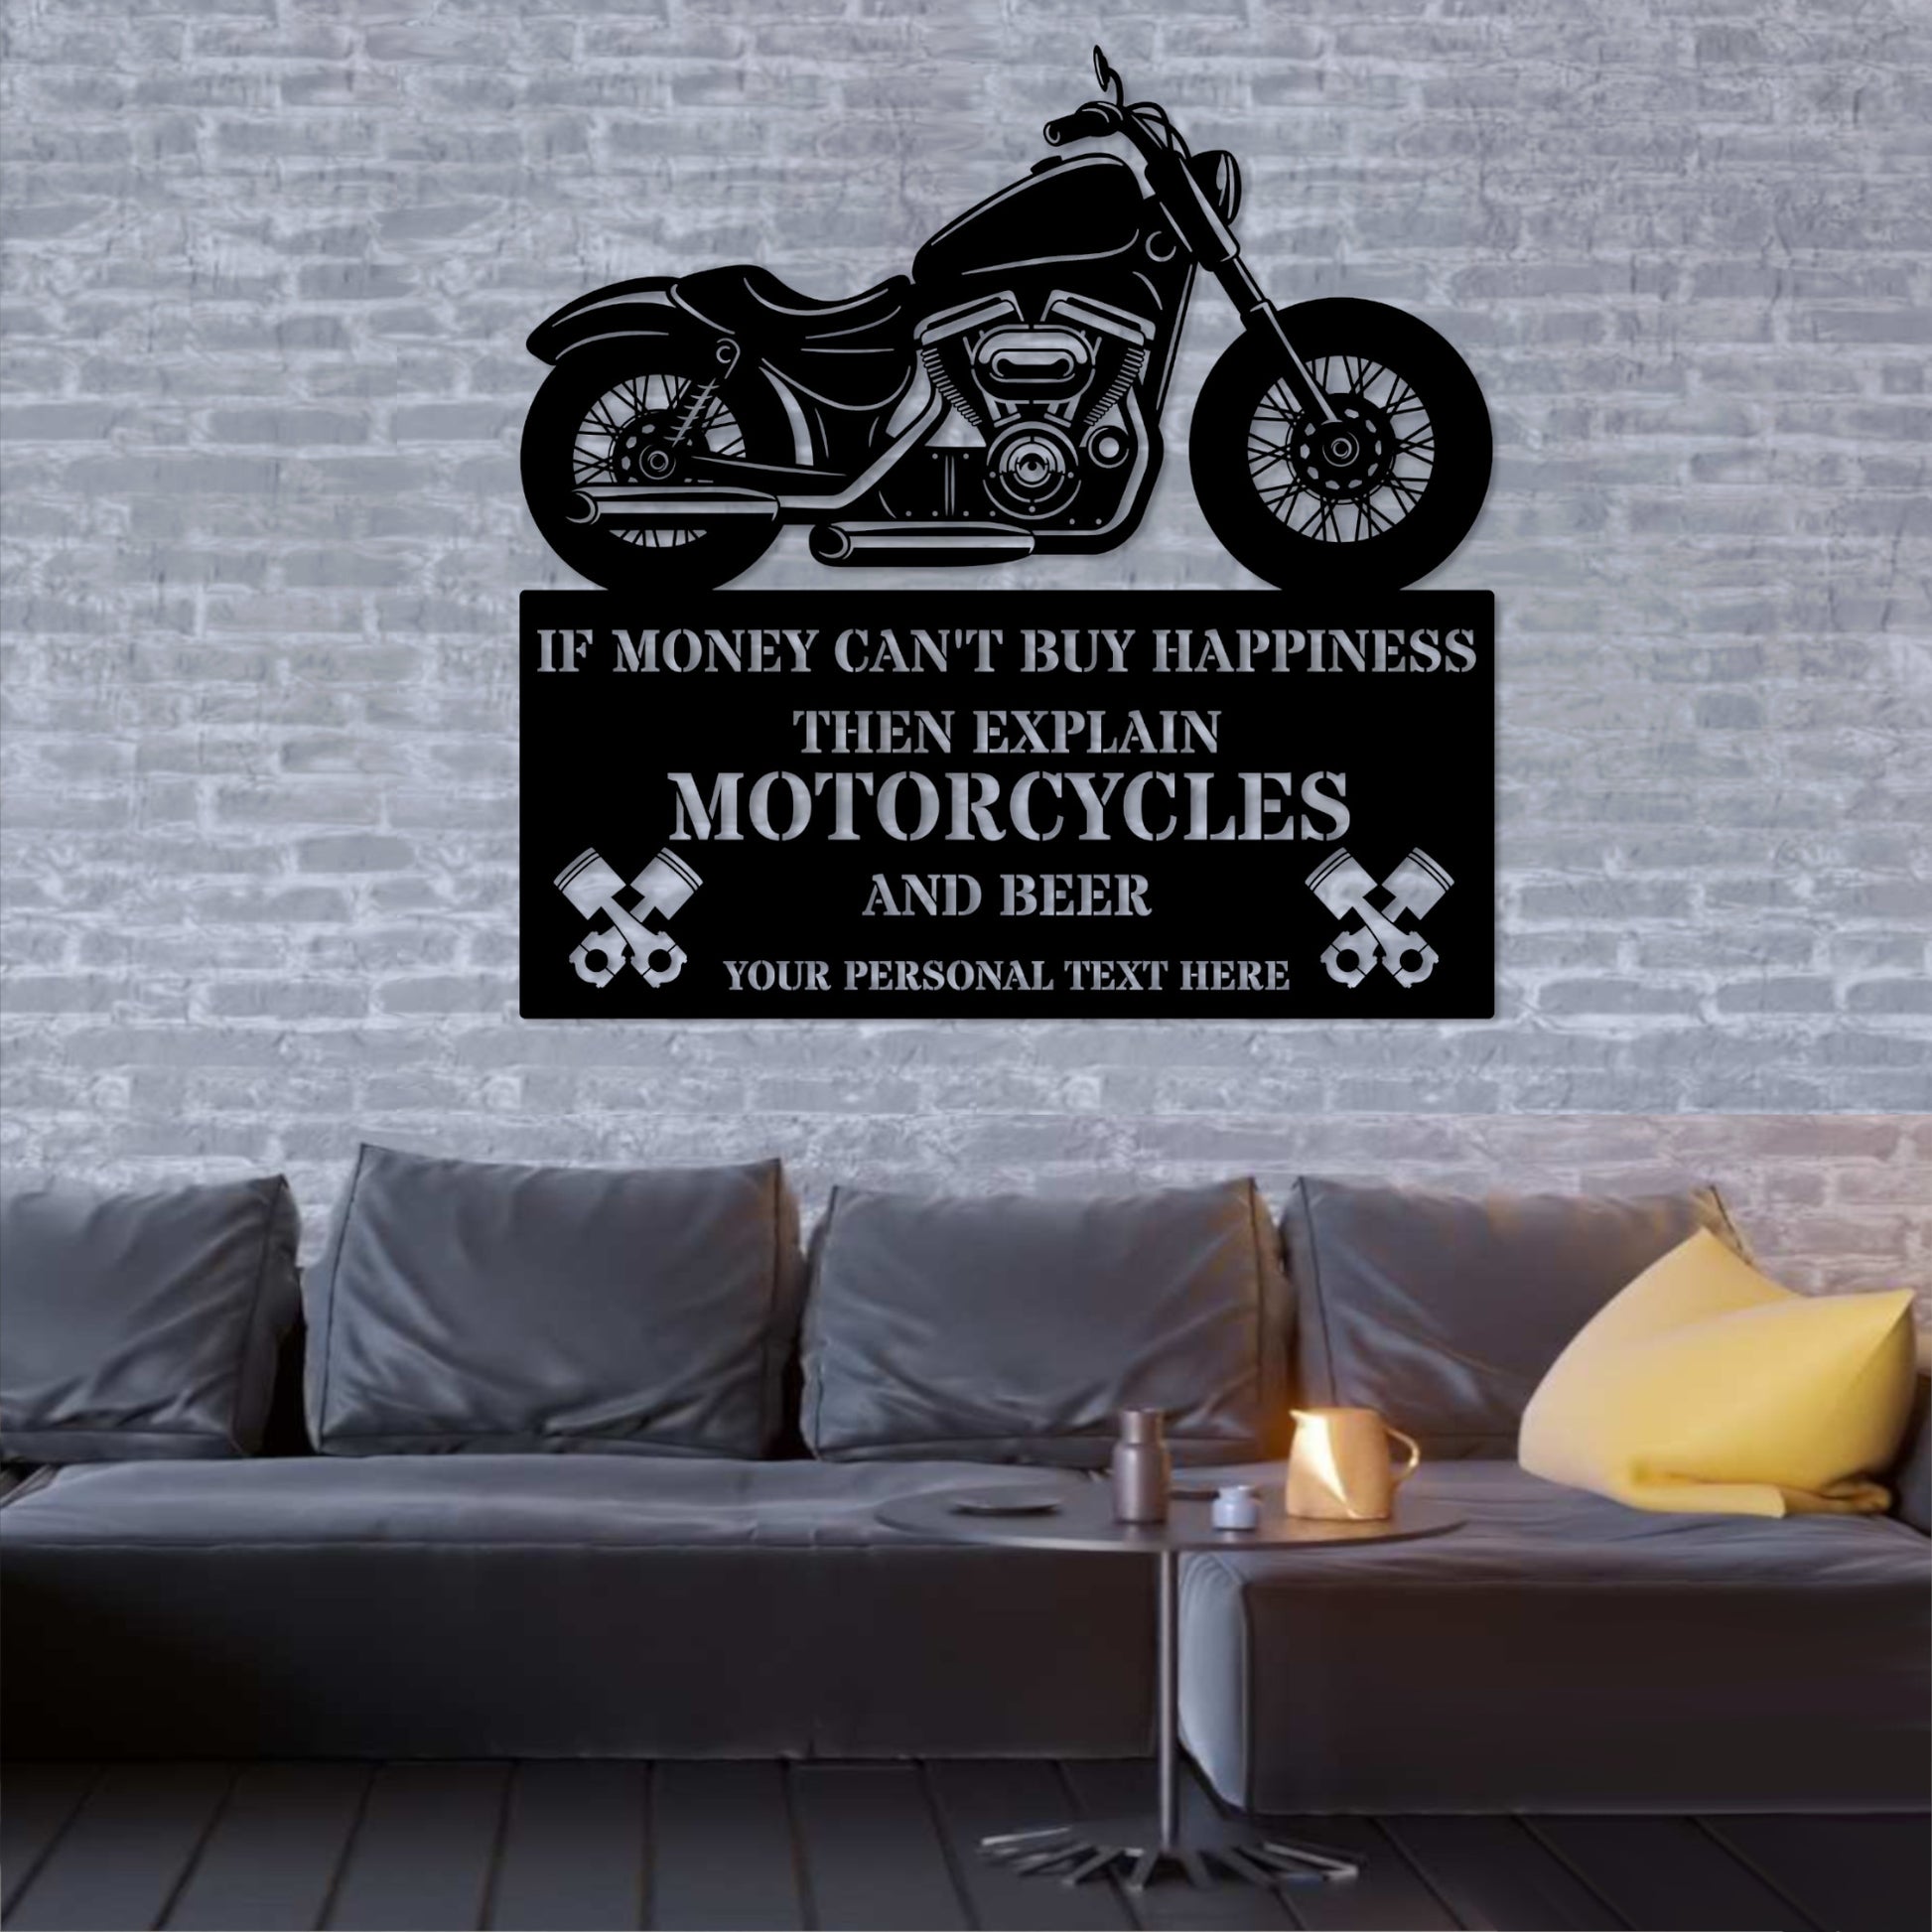 Personalized Motorcycle Name Metal Sign. Custom Biker Wall Decor Gift. Personal Vintage Motorbike Sign. Motorcyclist. Garage Wall Hanging